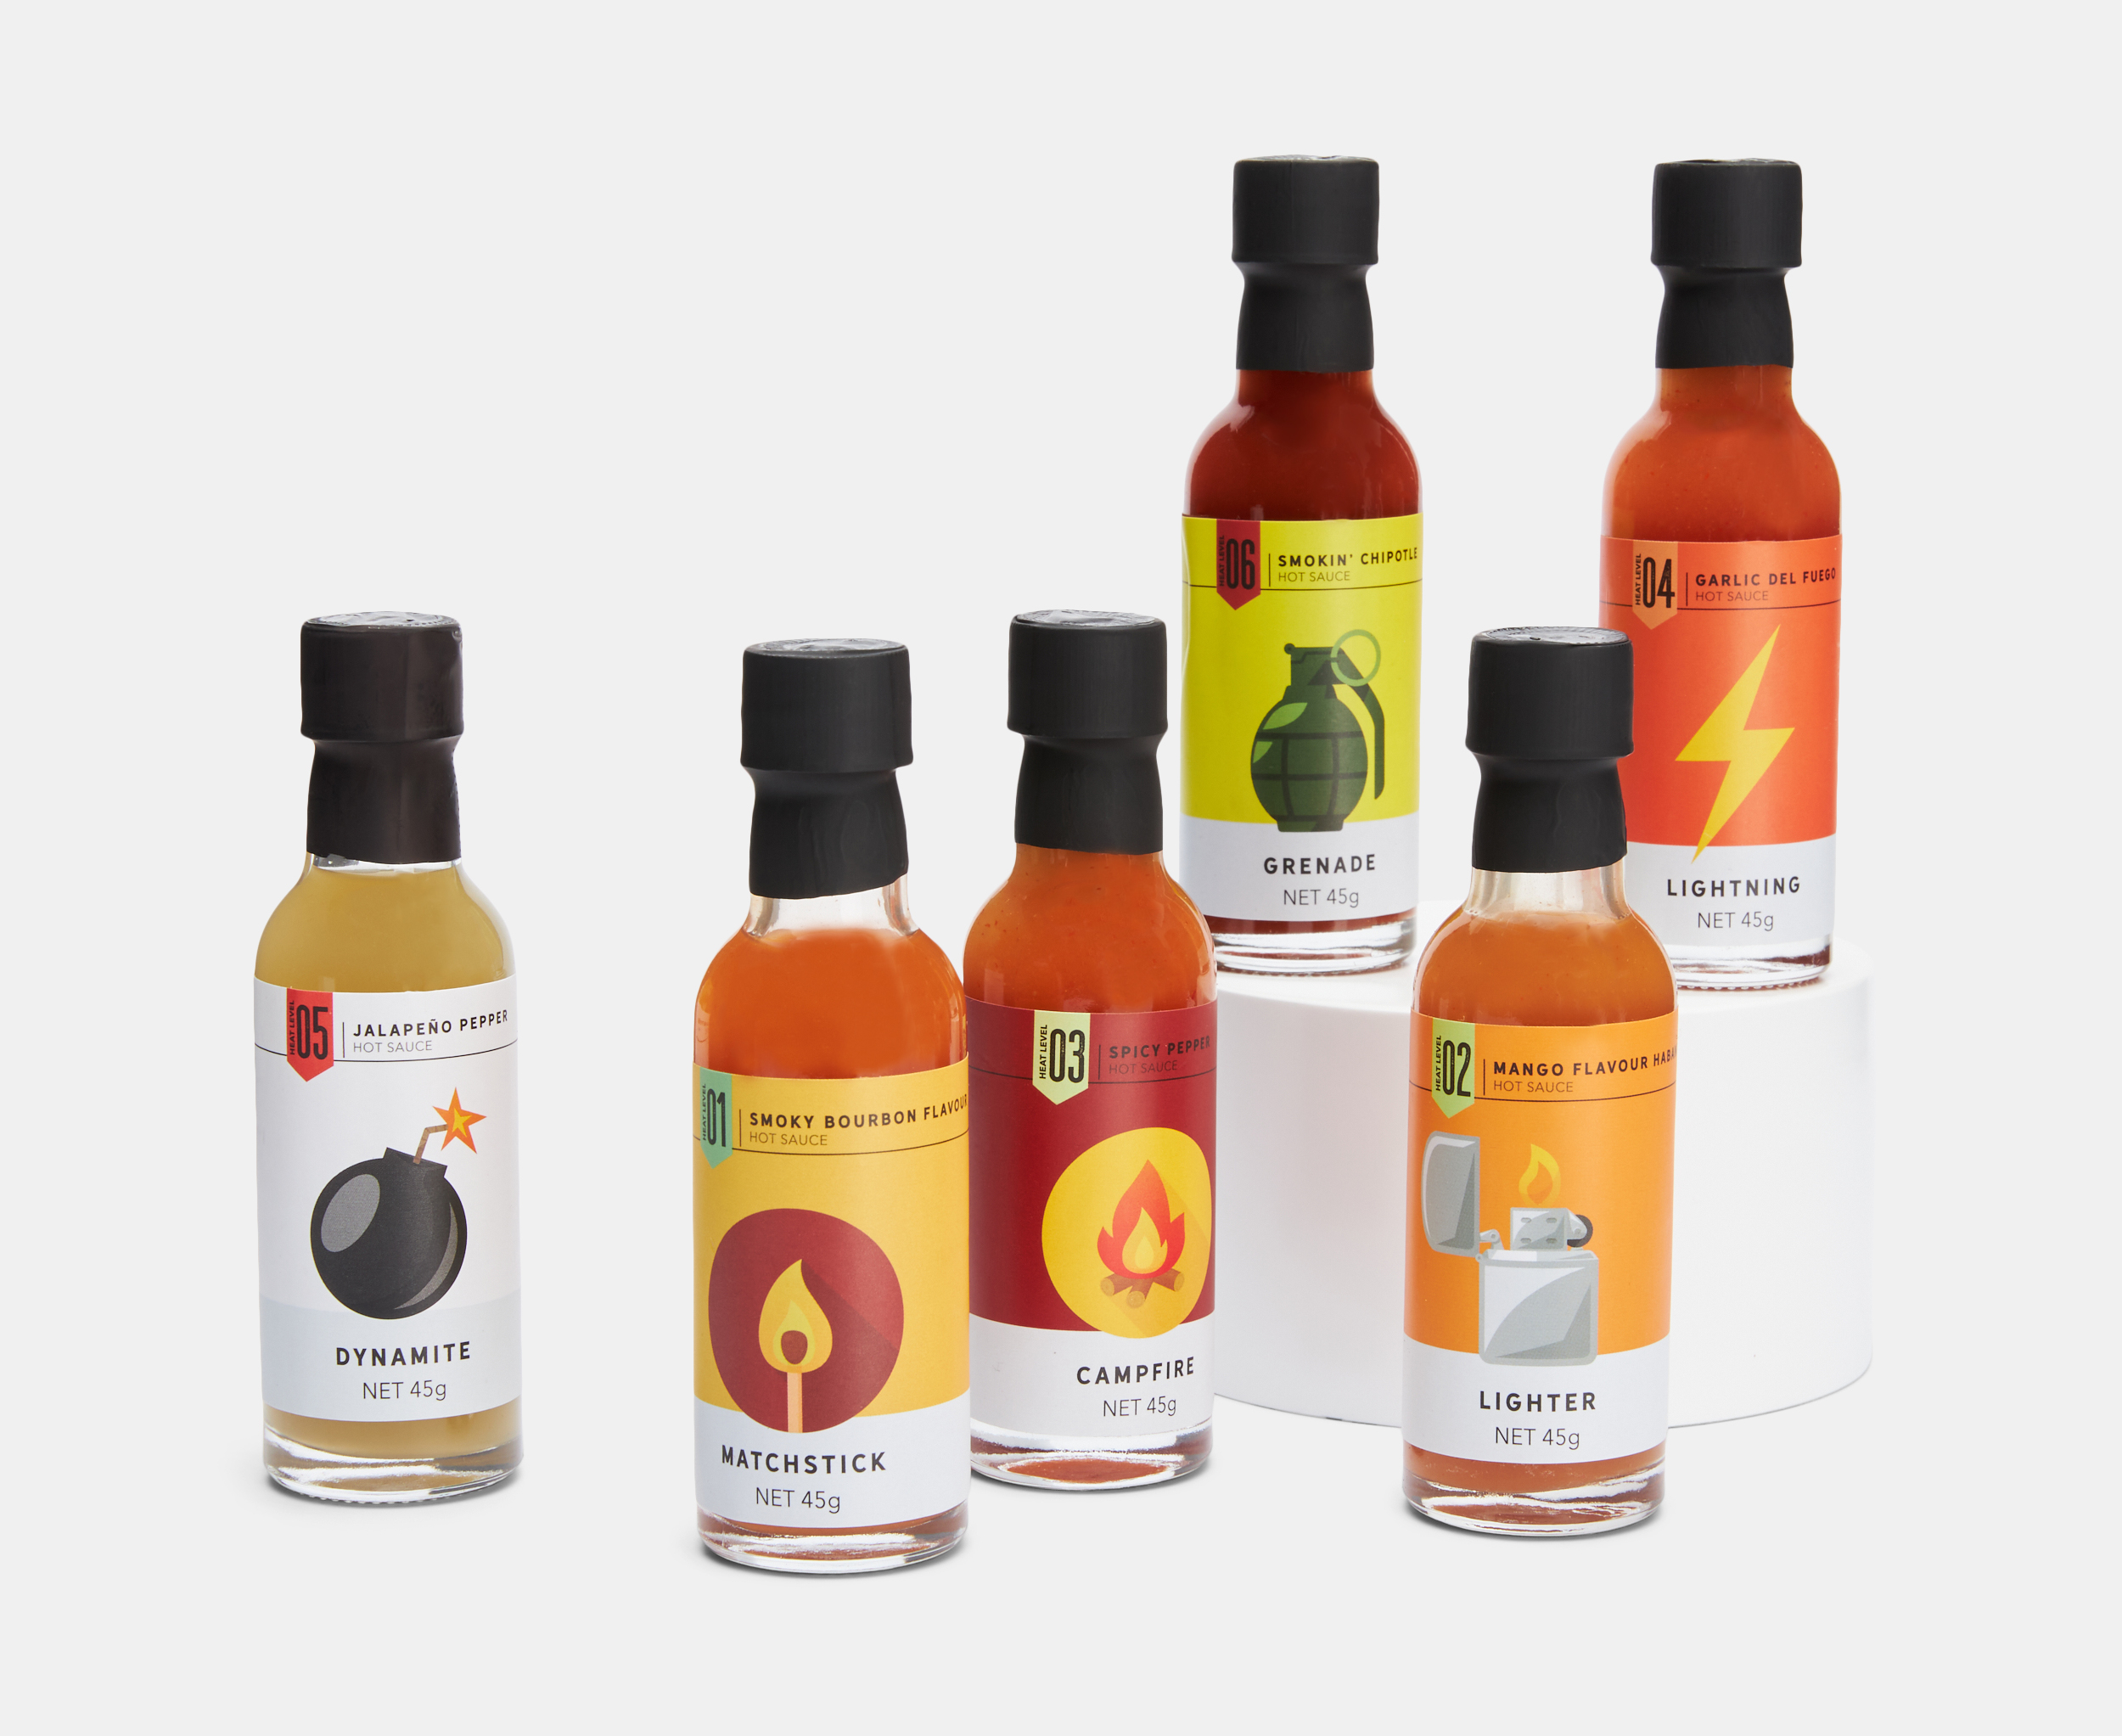 Modern Gourmet Foods The Global Spice Hot Sauce Challenge 6-Pack